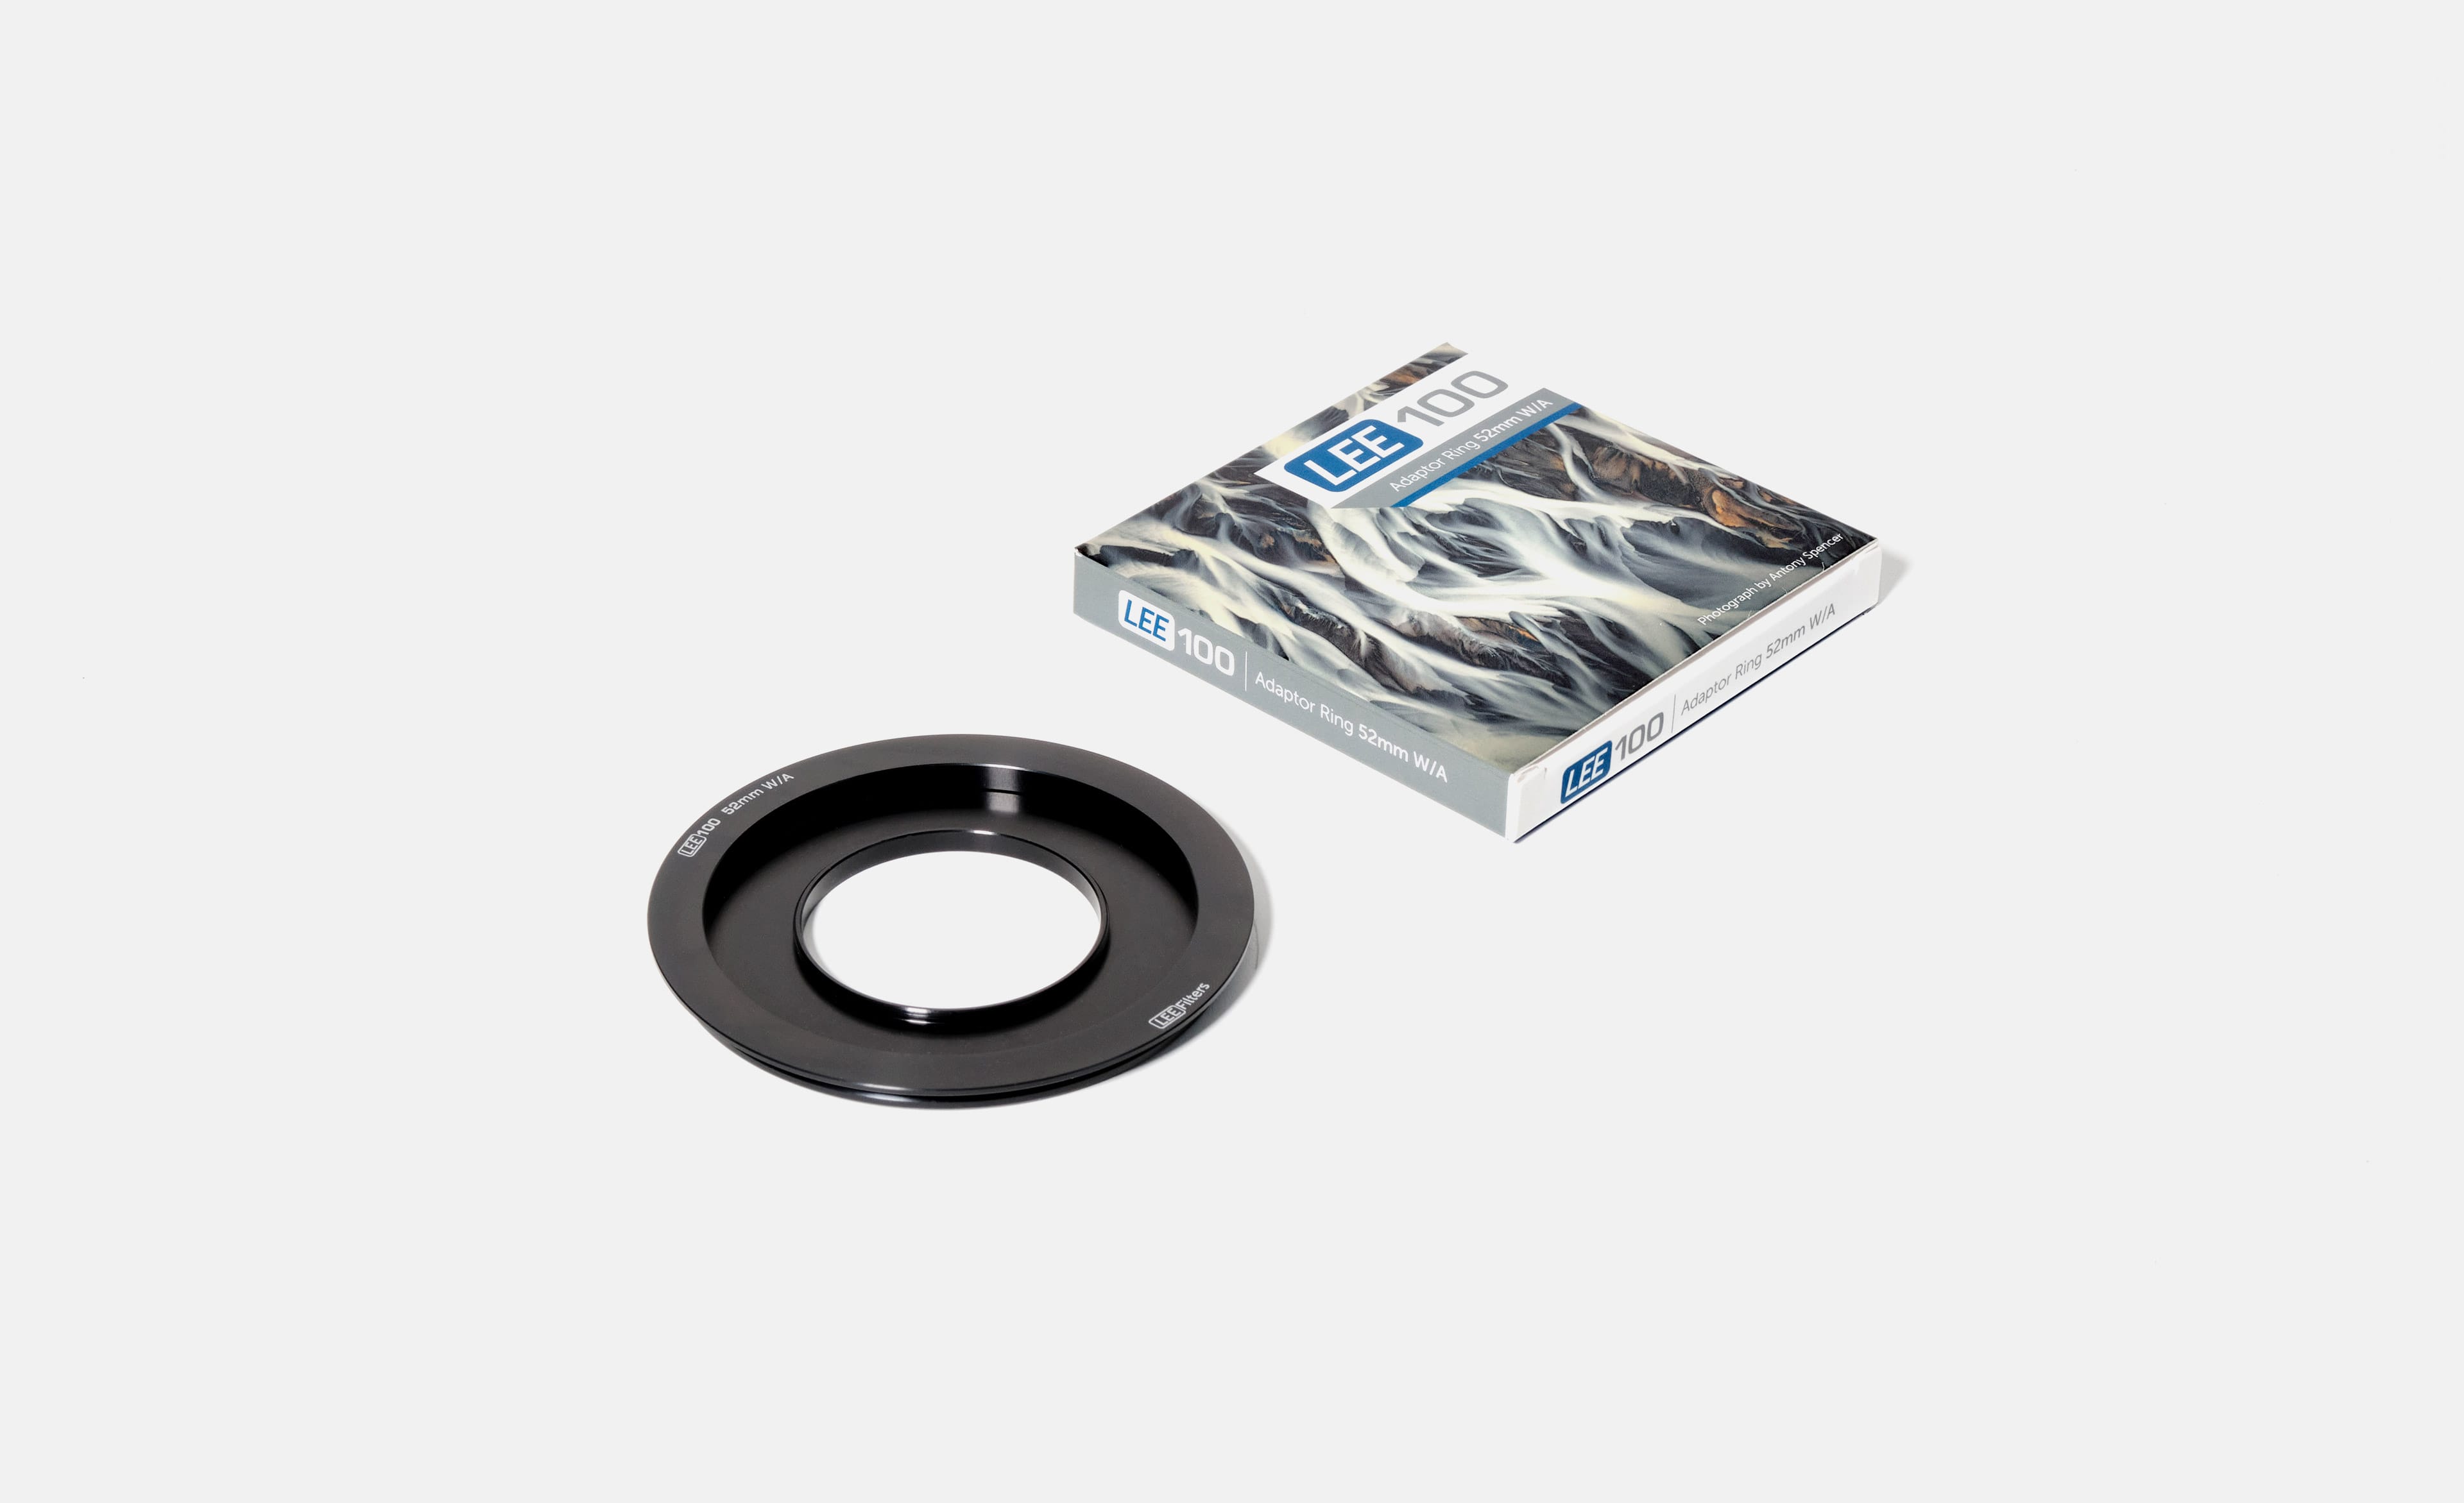 LEE Filters lee filters 100mm system 93mm Lens Adapter Ring 